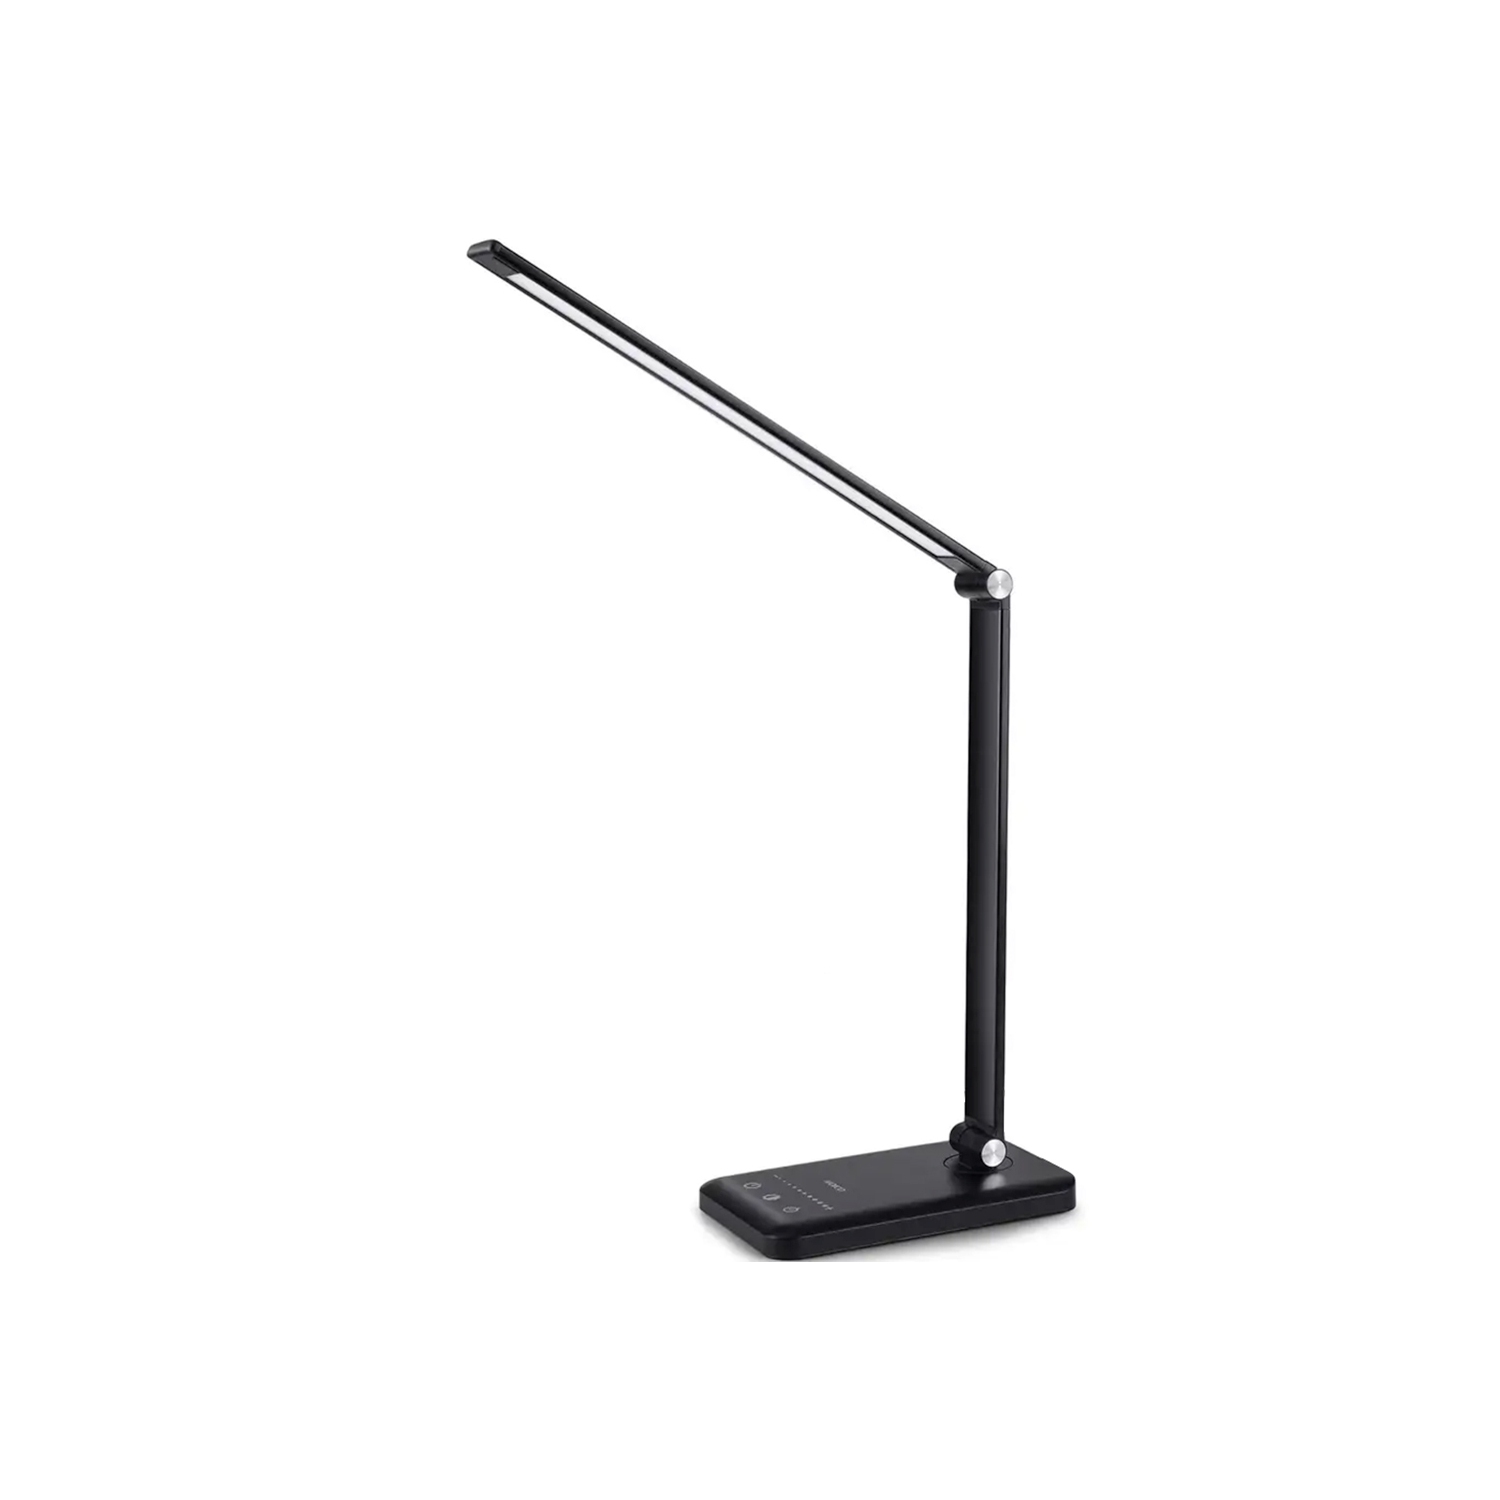 MotionGrey White LED Desk Lamp Eye Caring Table Lamp with Touch-Sensitive Control, Multi Lighting Mode Light for Office Home - Black